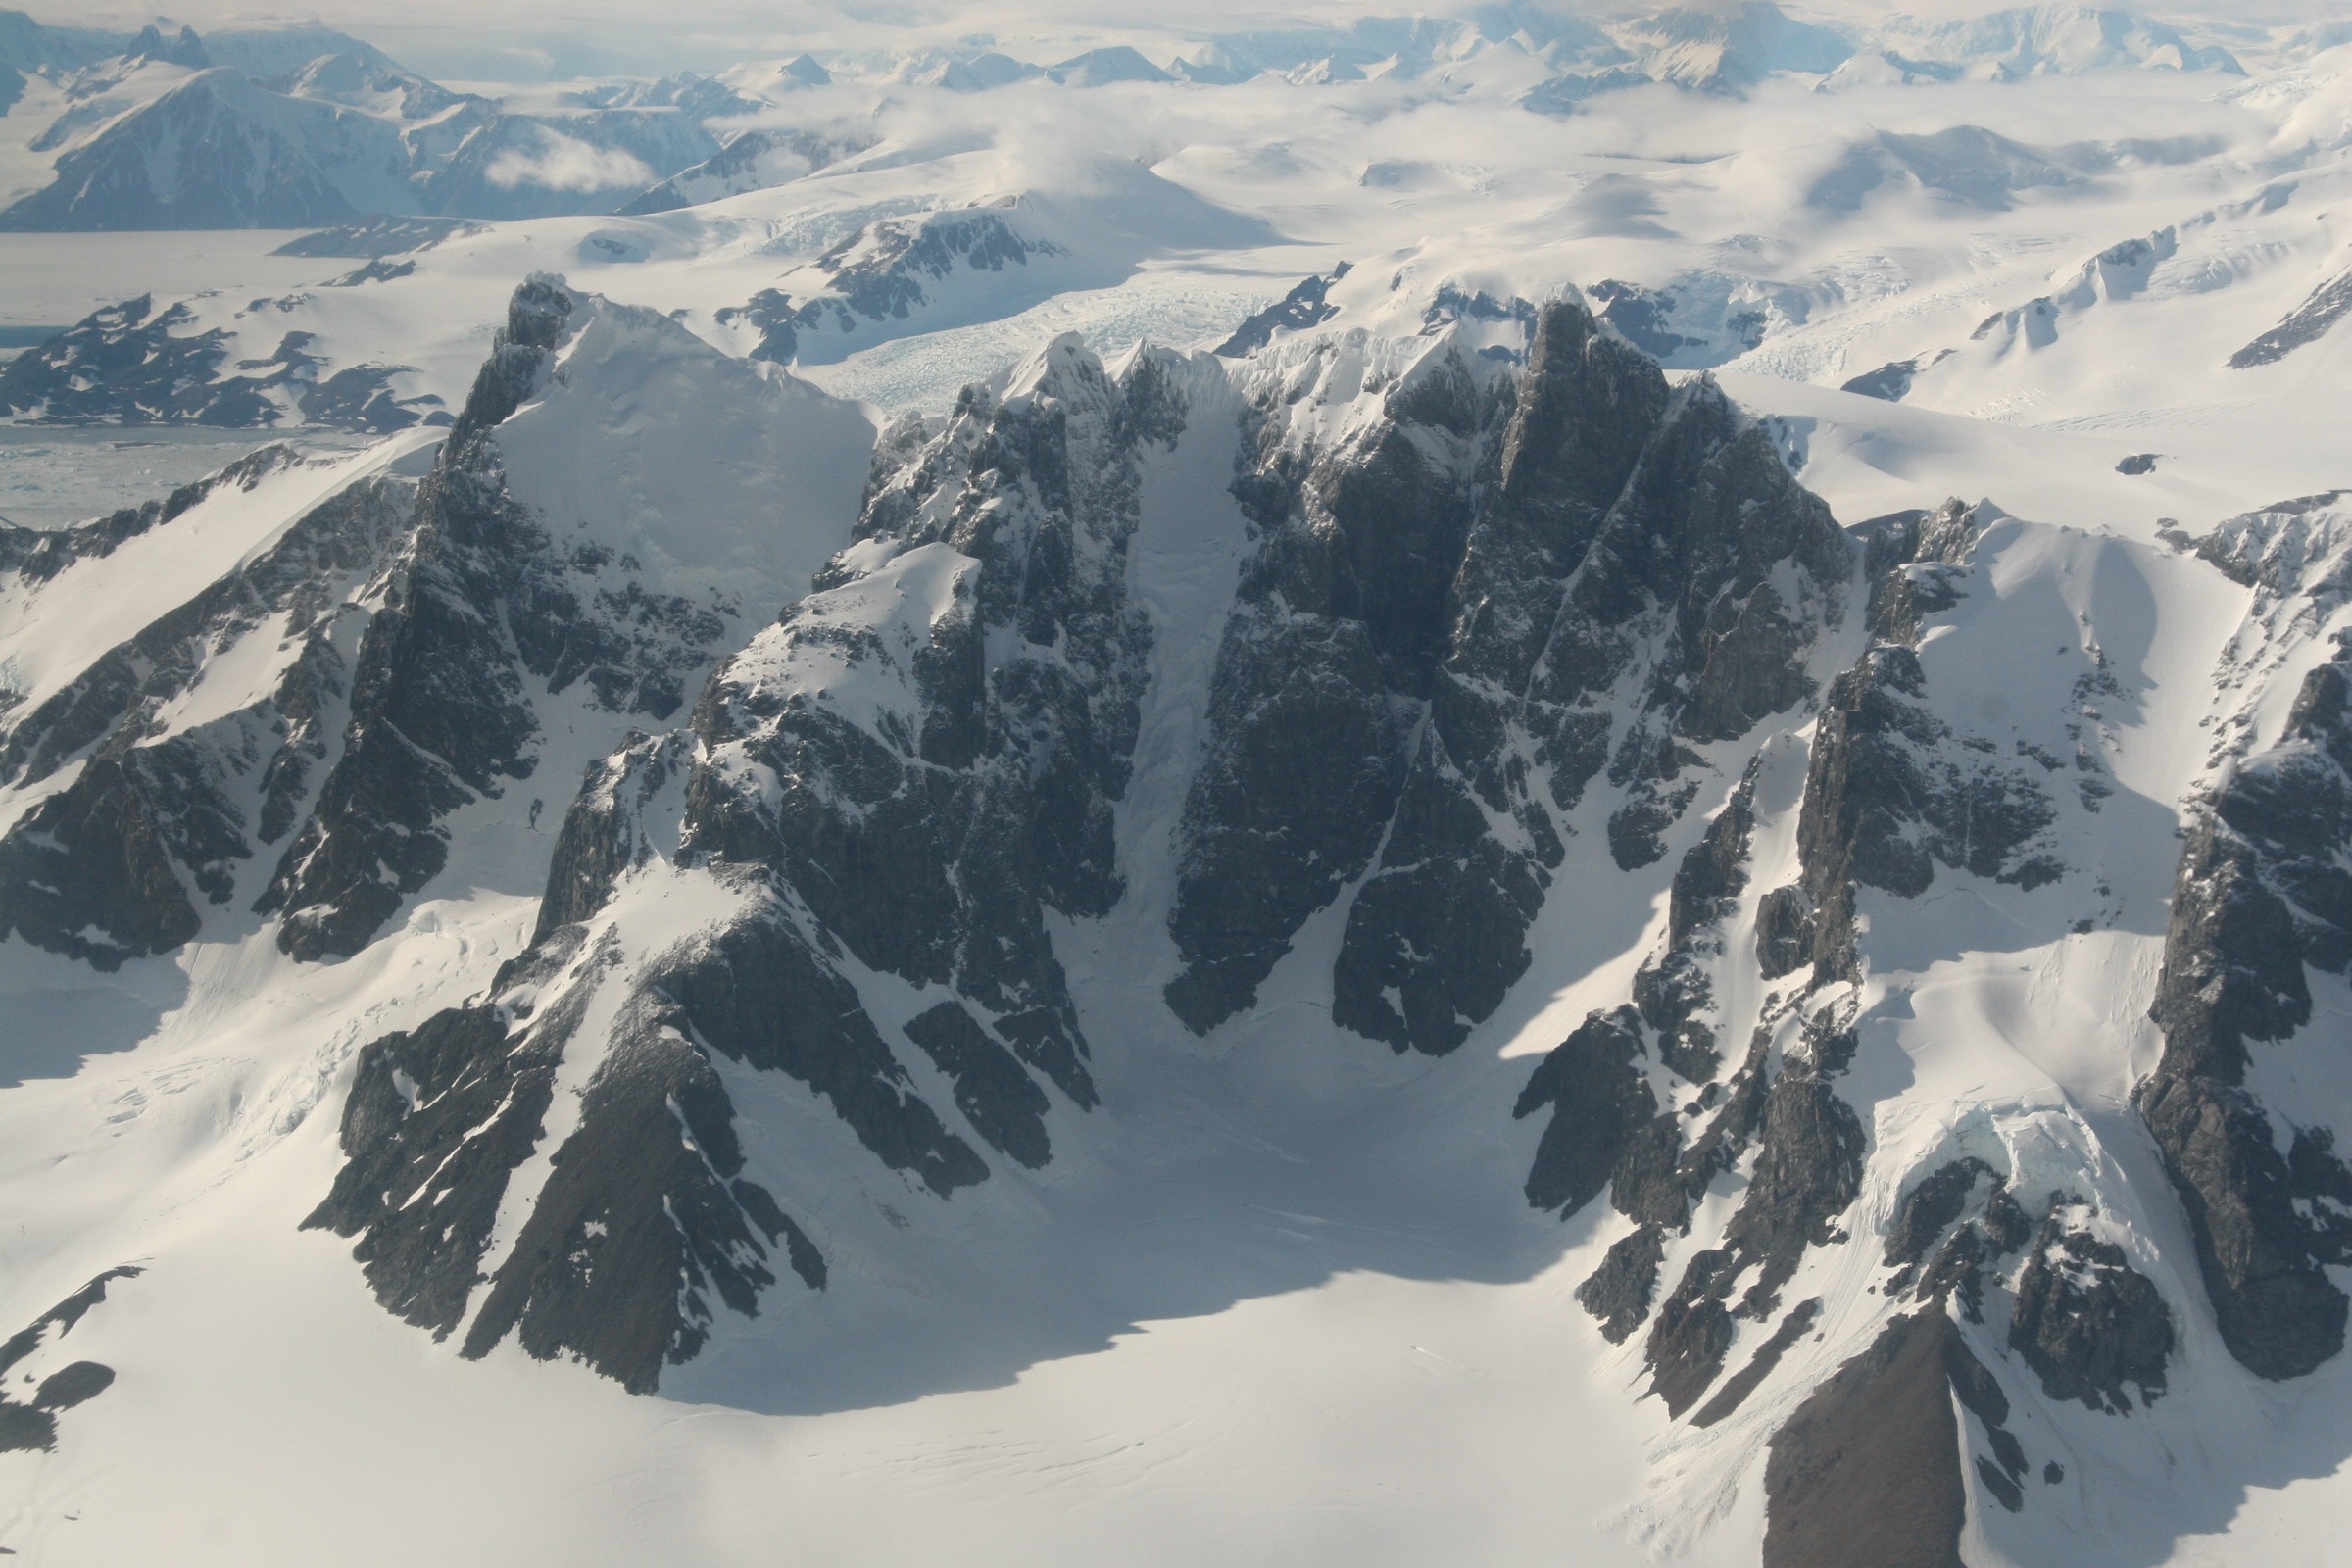 The Antarctic Peninsula from the air: although the mountains are plastered in snow and ice, measurements tell us that this region is losing ice at an increasing rate.